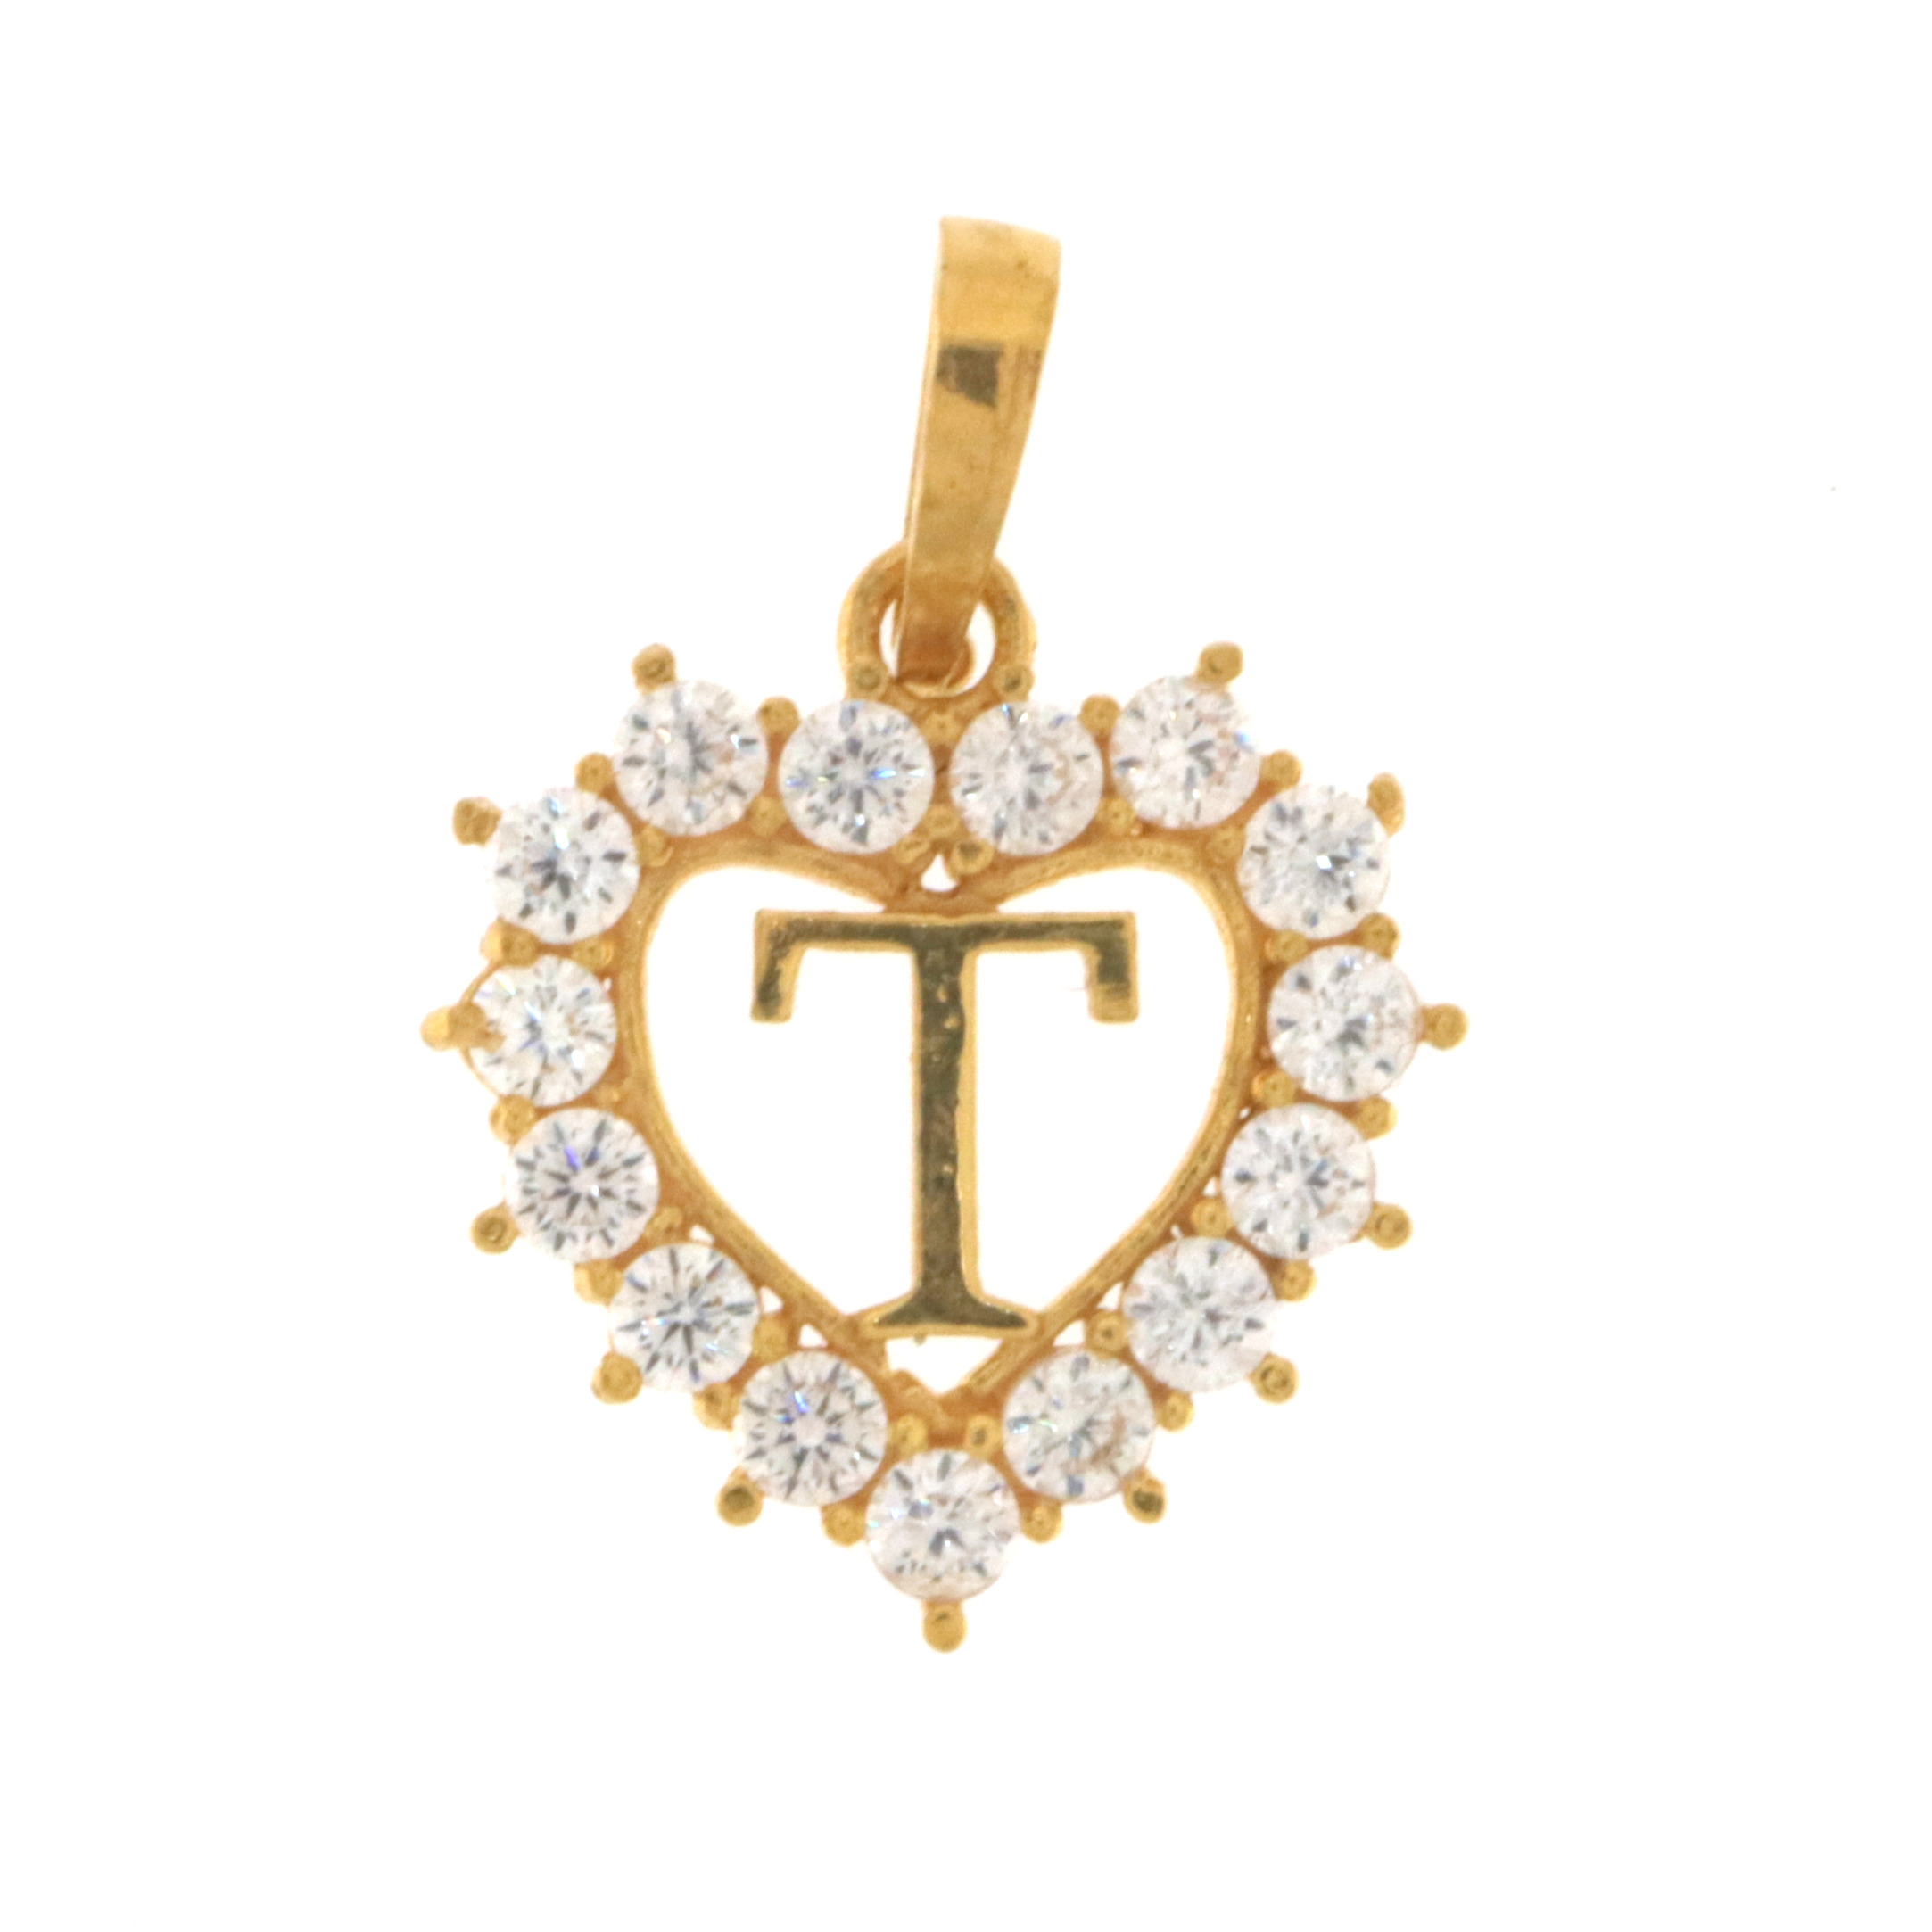 22ct Real Gold Asian/Indian/Pakistani Style Heart 'T' Pendant